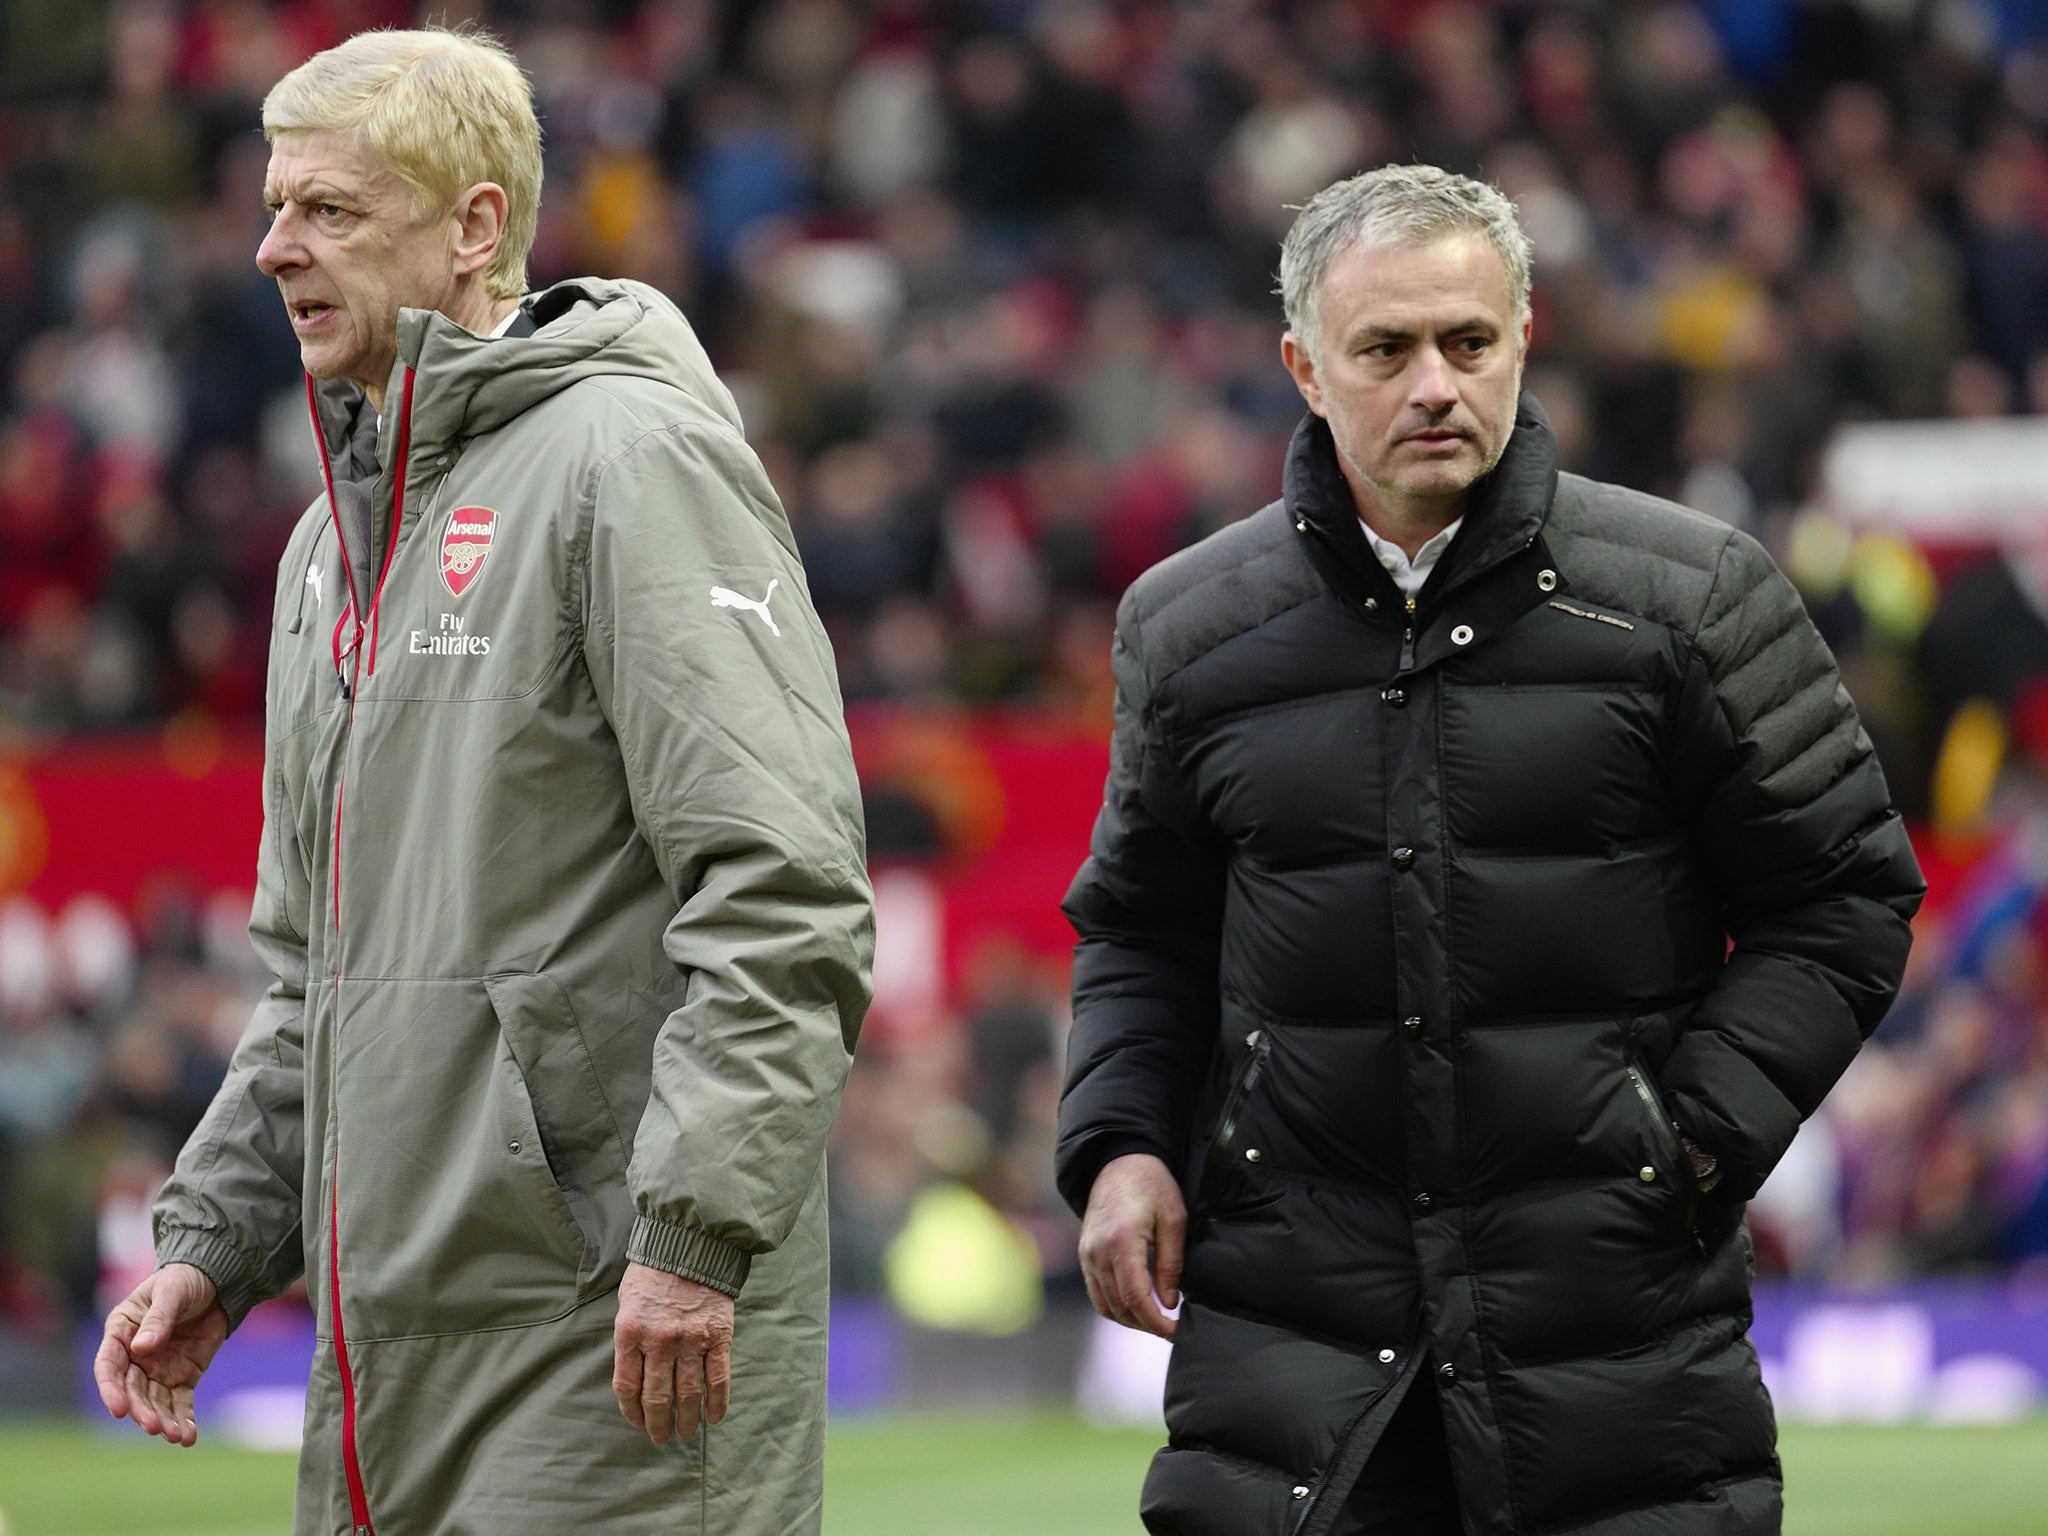 Wenger and Mourinho on the Old Trafford touchline